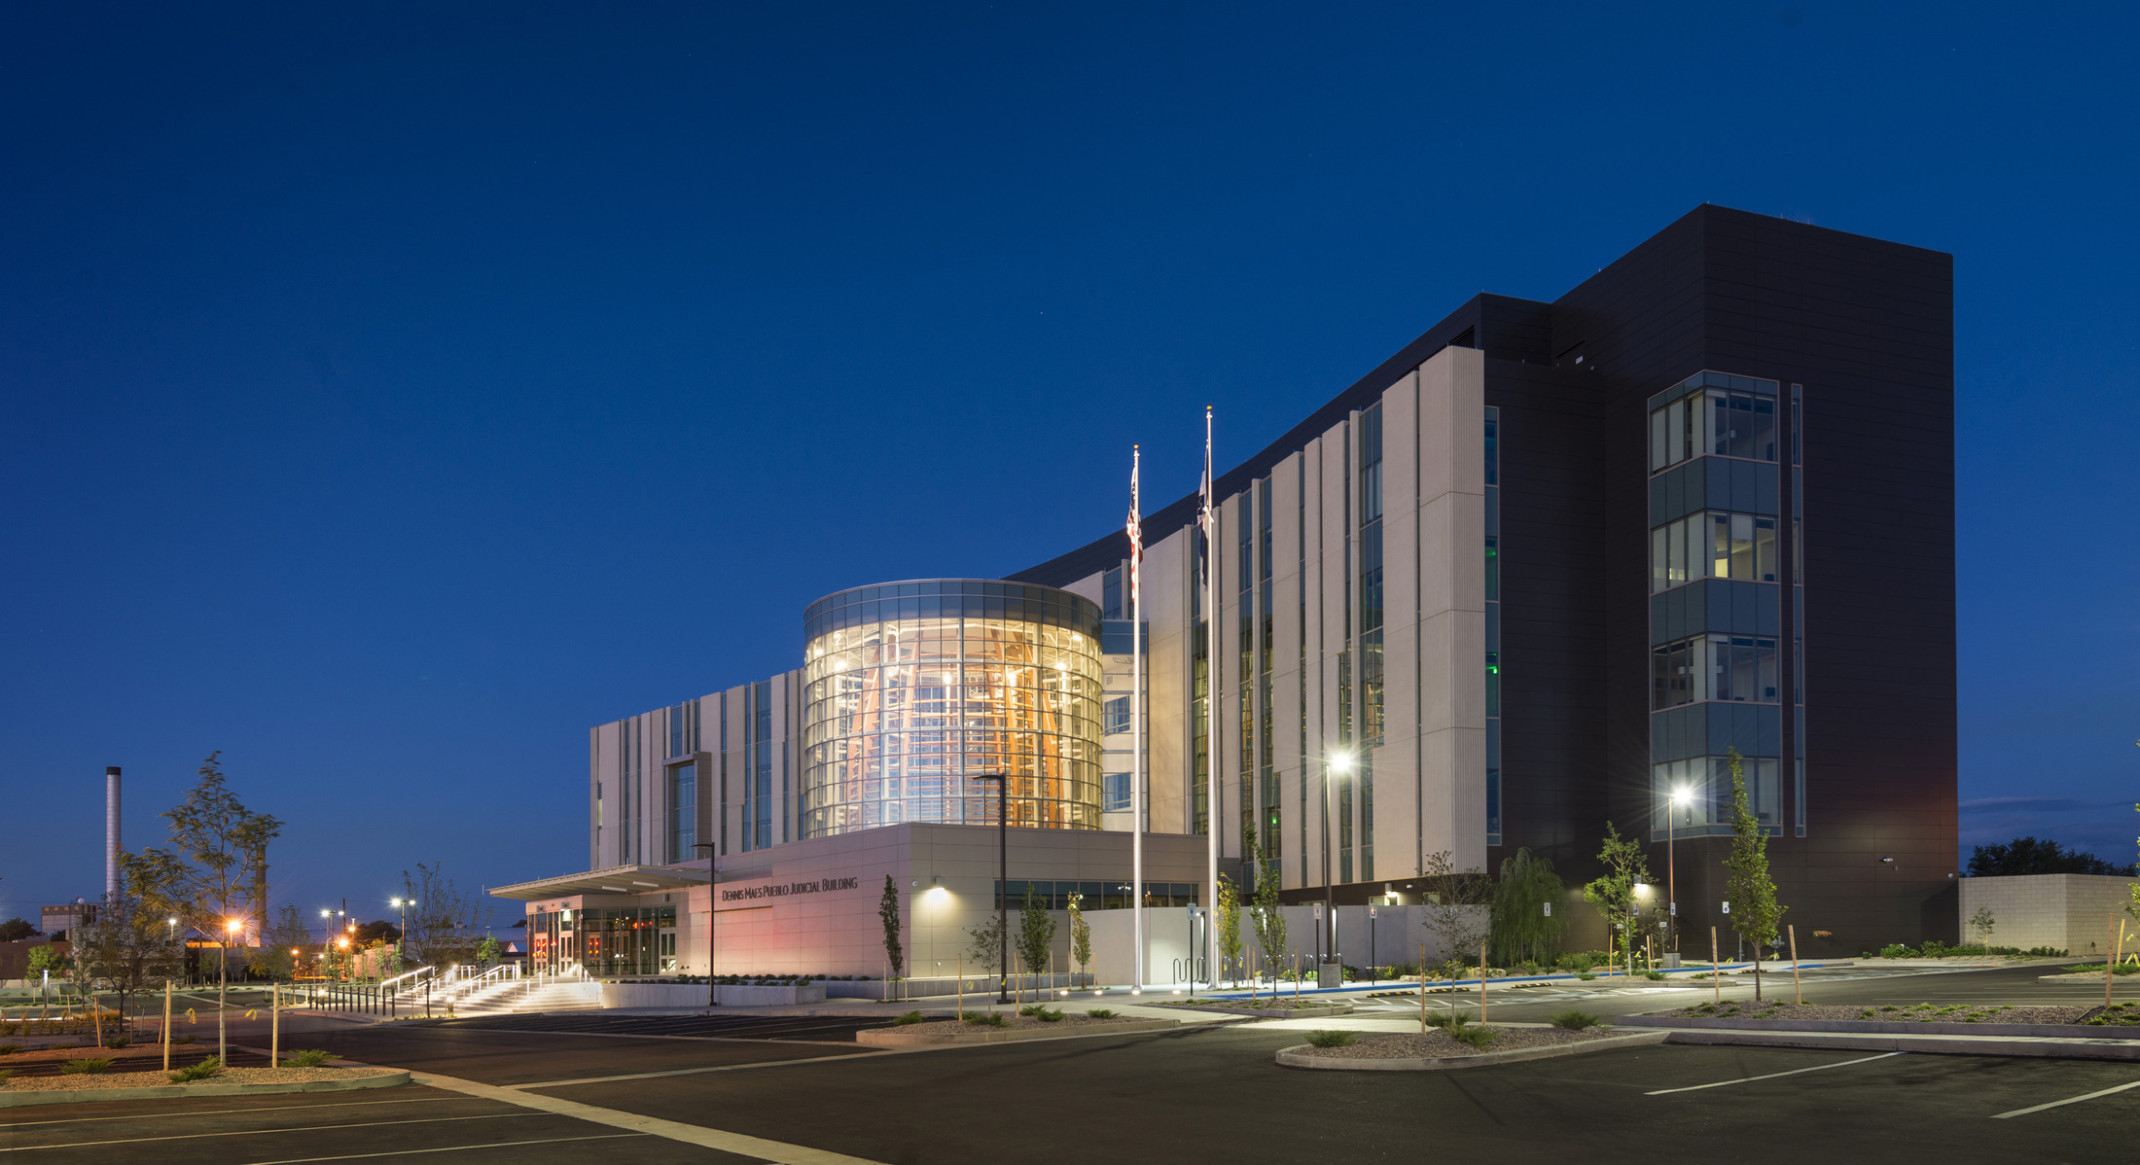 The Dennis Maes Pueblo Judicial Building illuminated at night from the glass cylindrical tower at center above the entry